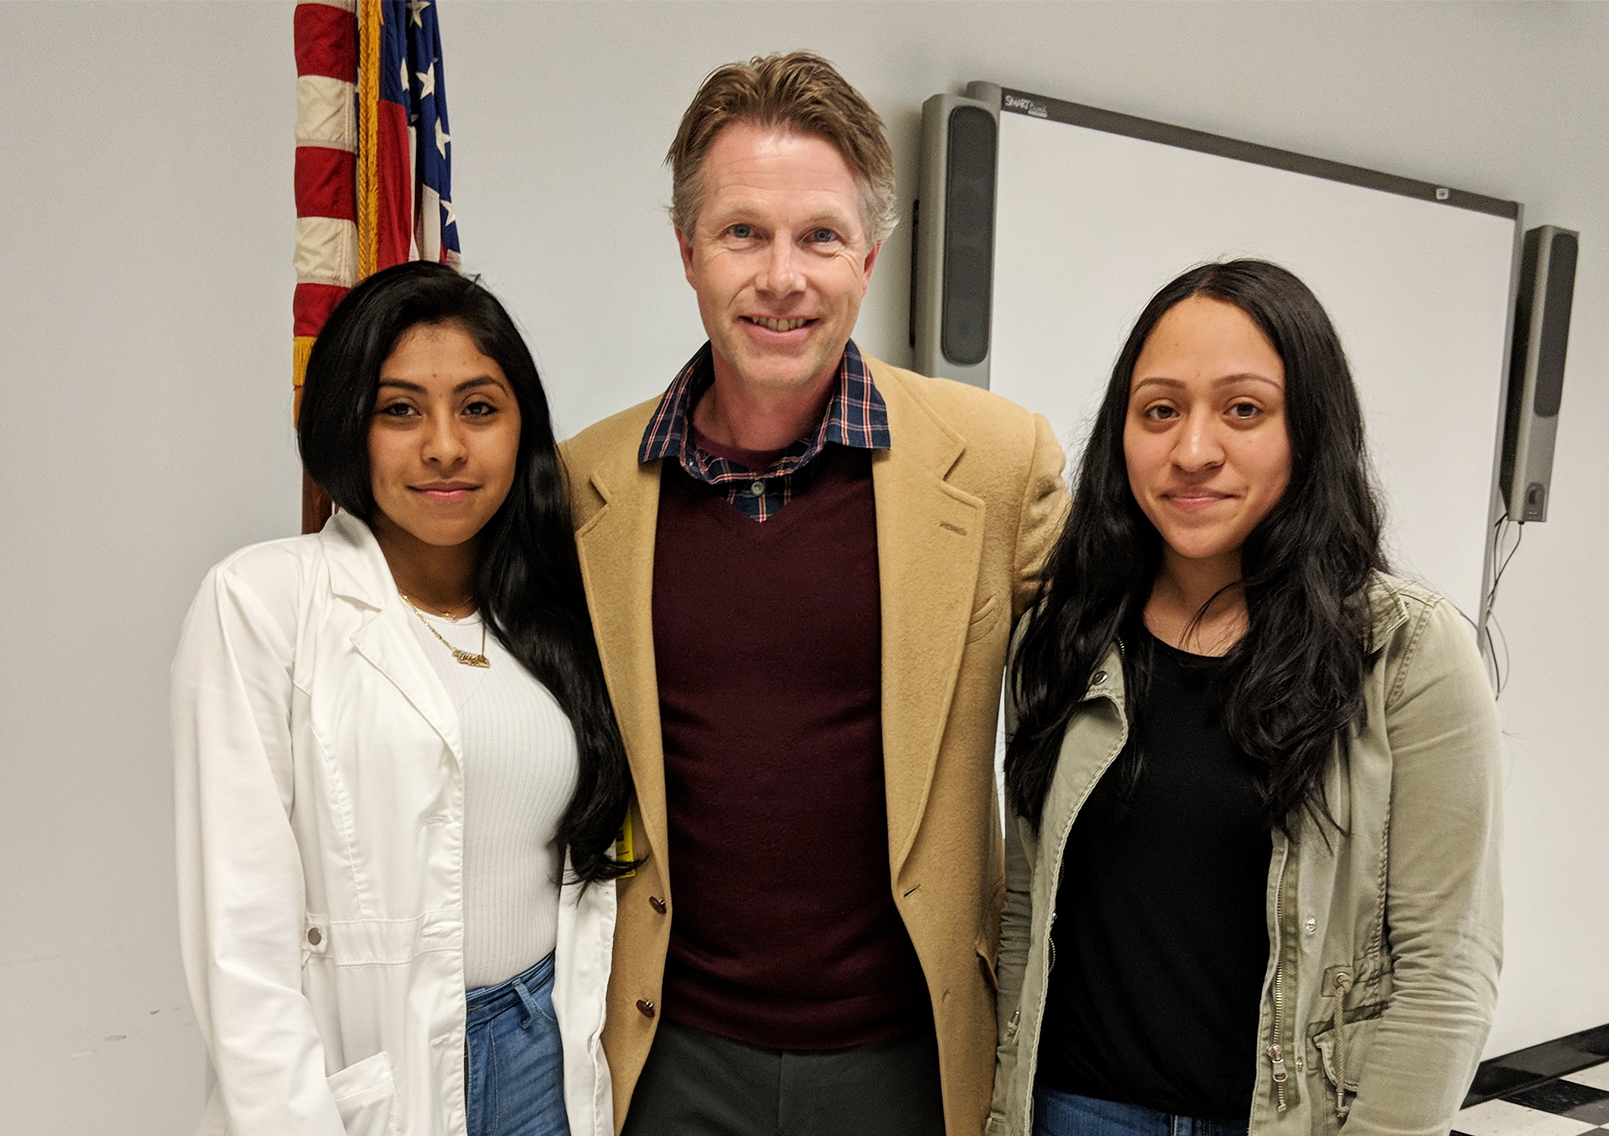 Jakeline Arevalo and Melissa Ceron are congratulated by South High guidance counselor Christopher Erickson. (Photo courtesy of Great Neck Public Schools)